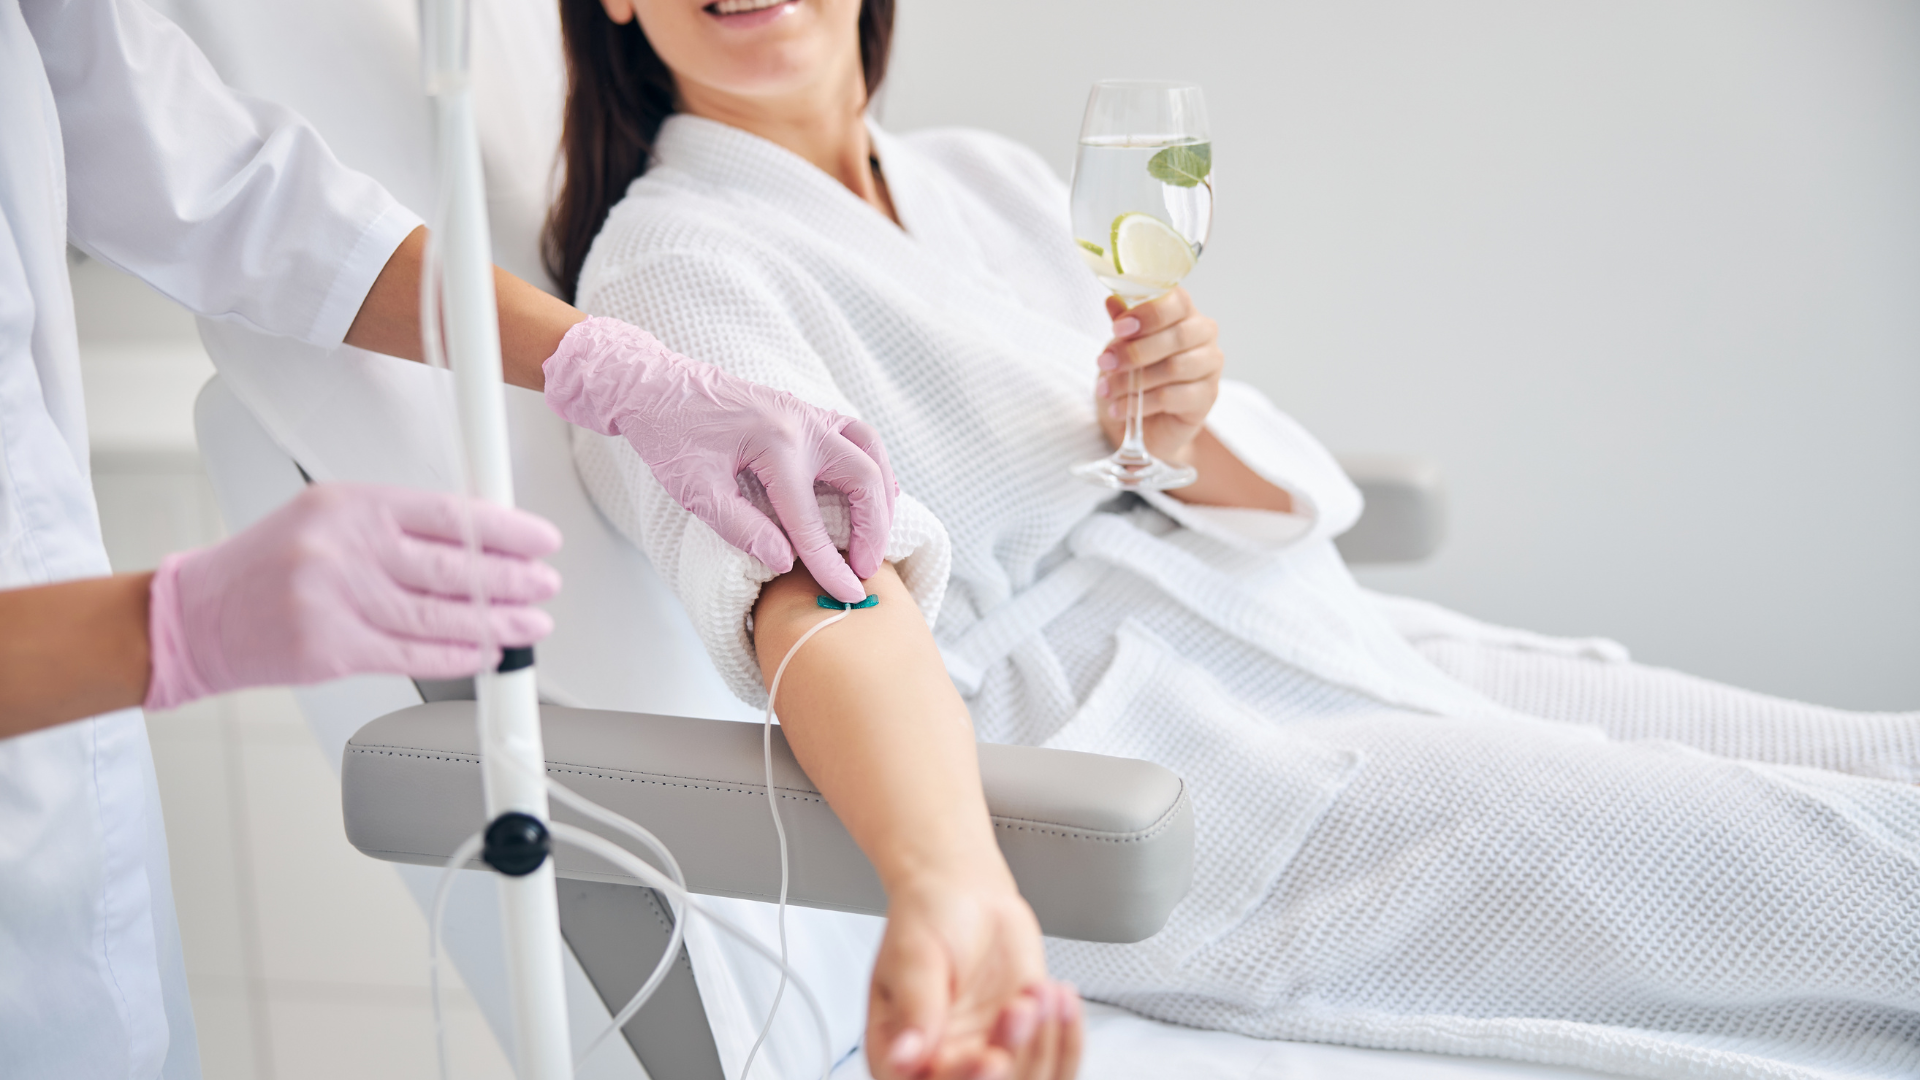 Intravenous Therapy a Revolutionary Way to Improve Your Health